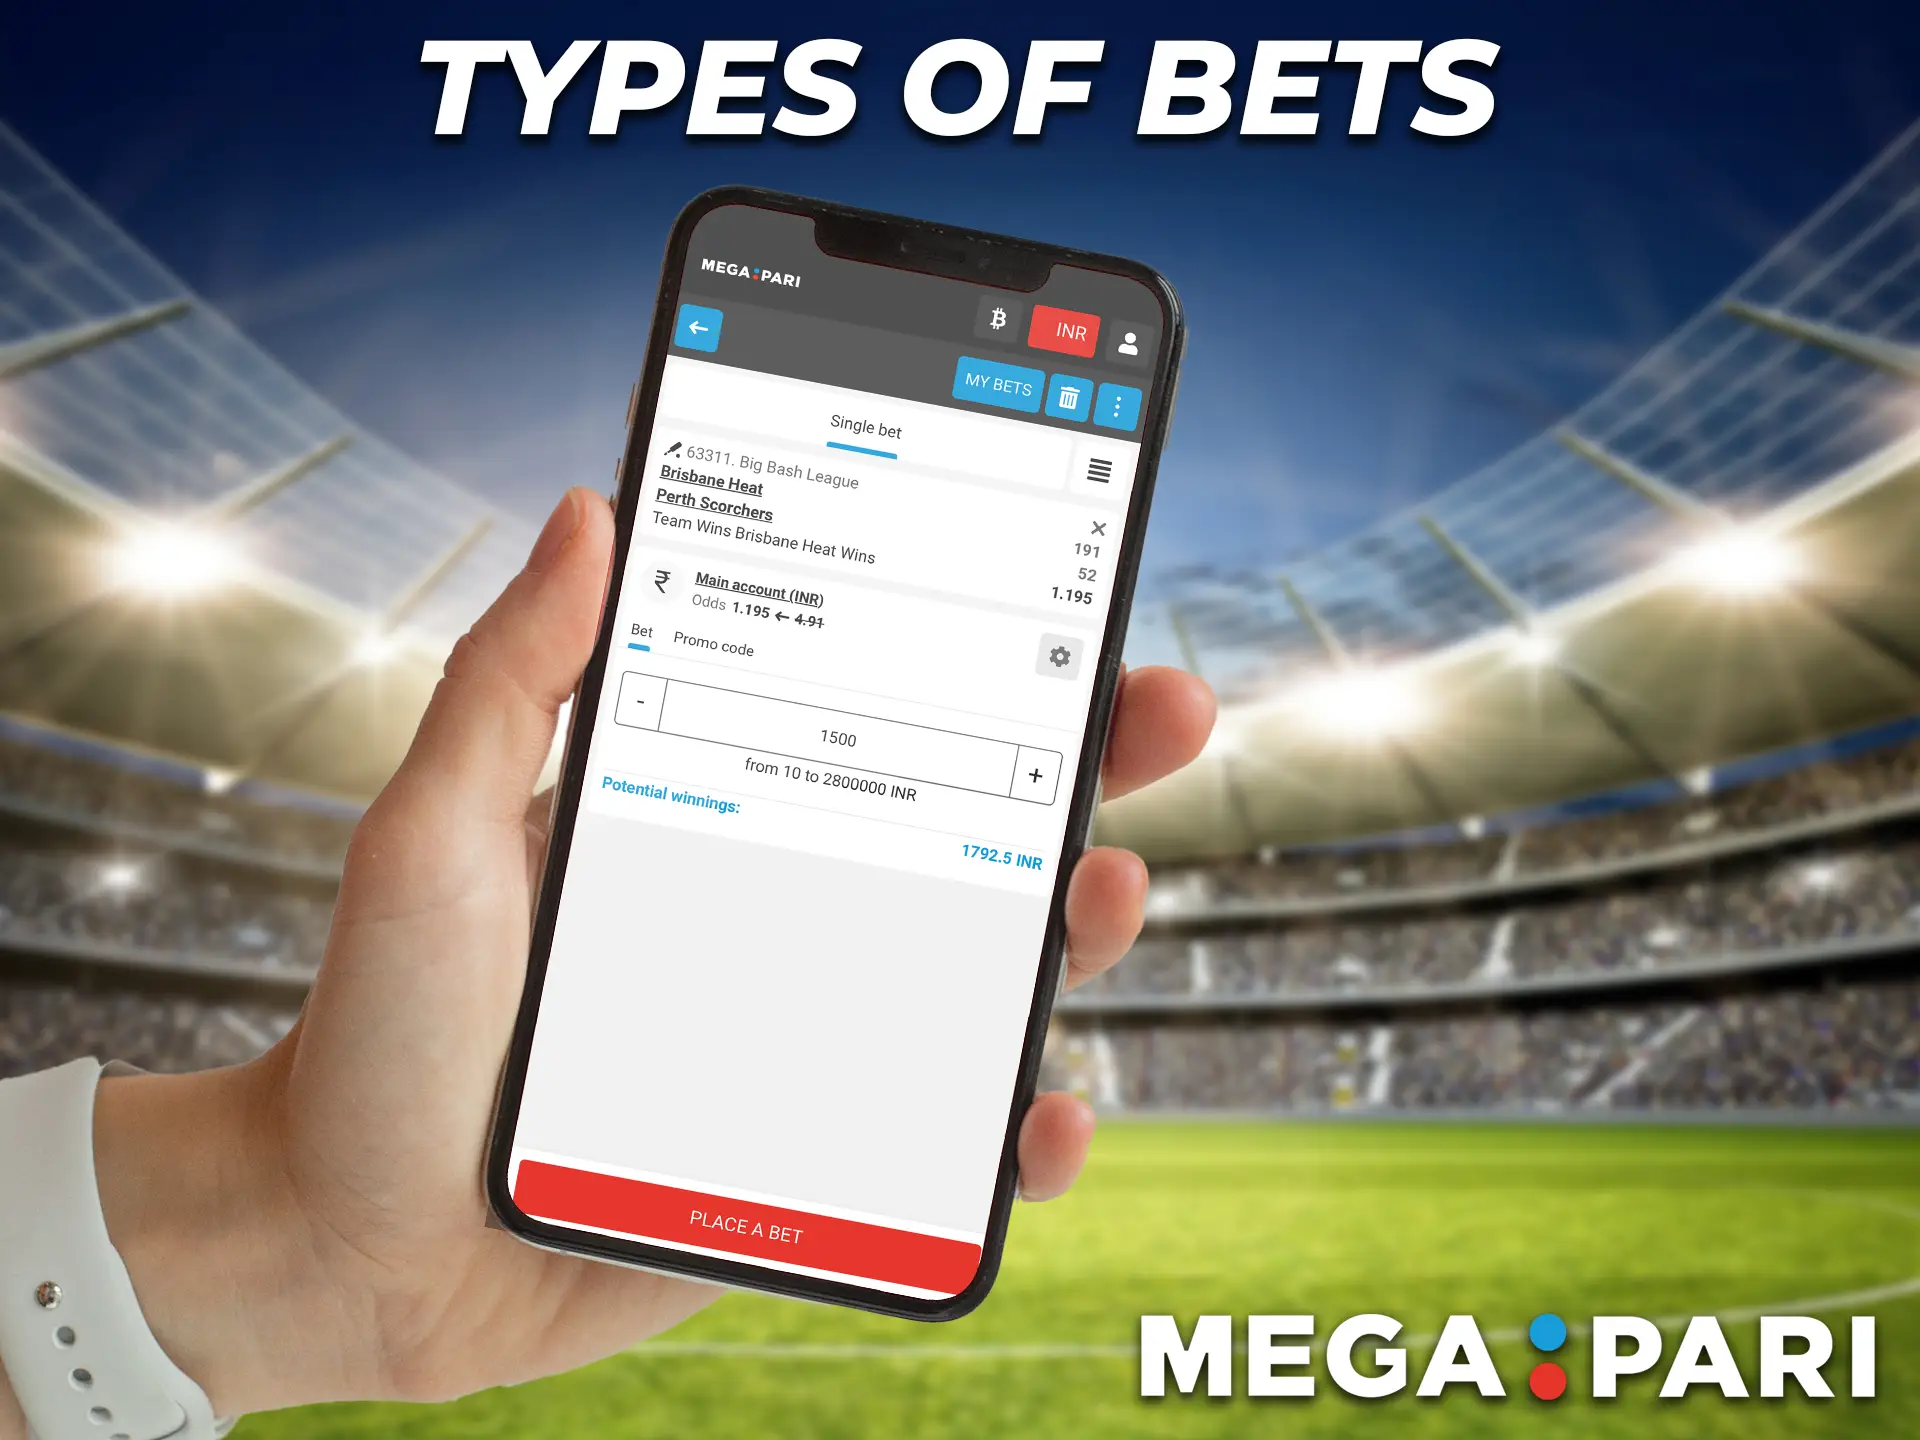 A review of the types of sports betting on the Megapari app.